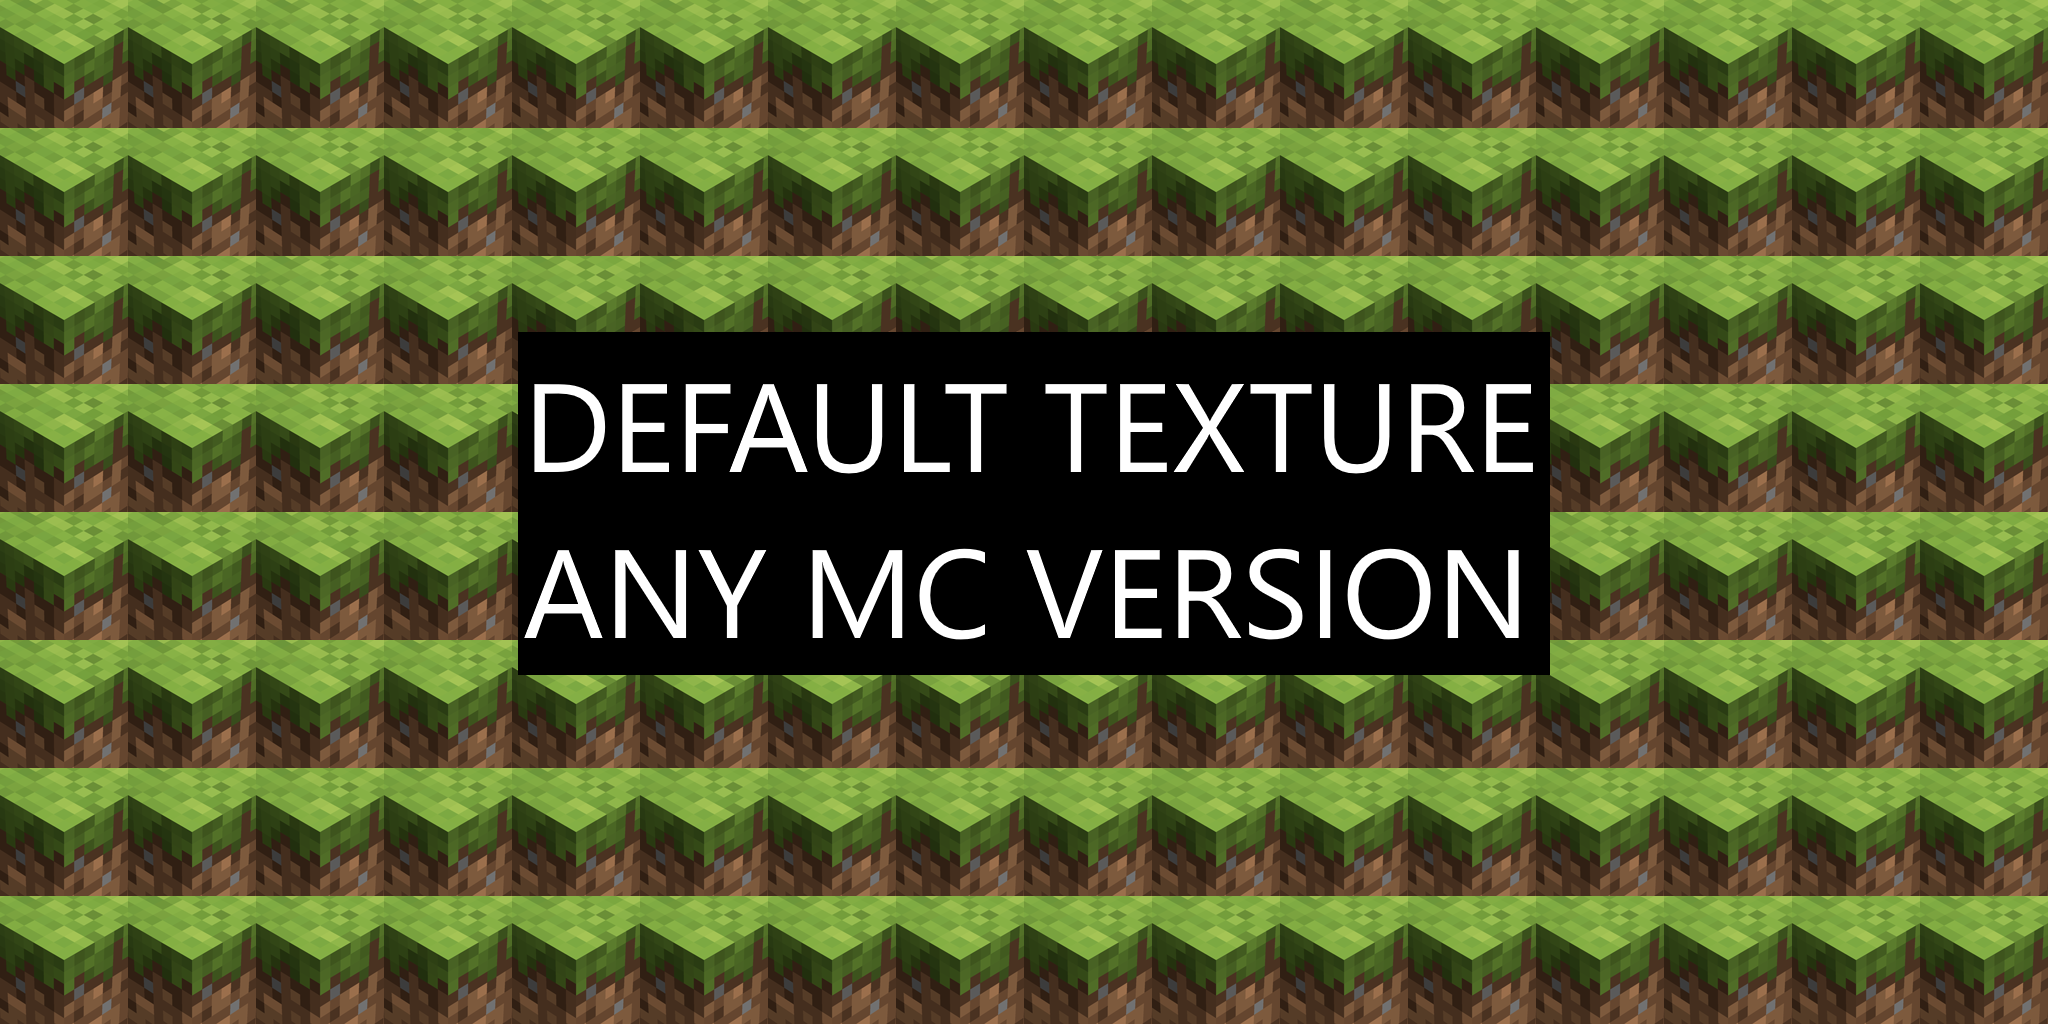 default texture title with grass tiled